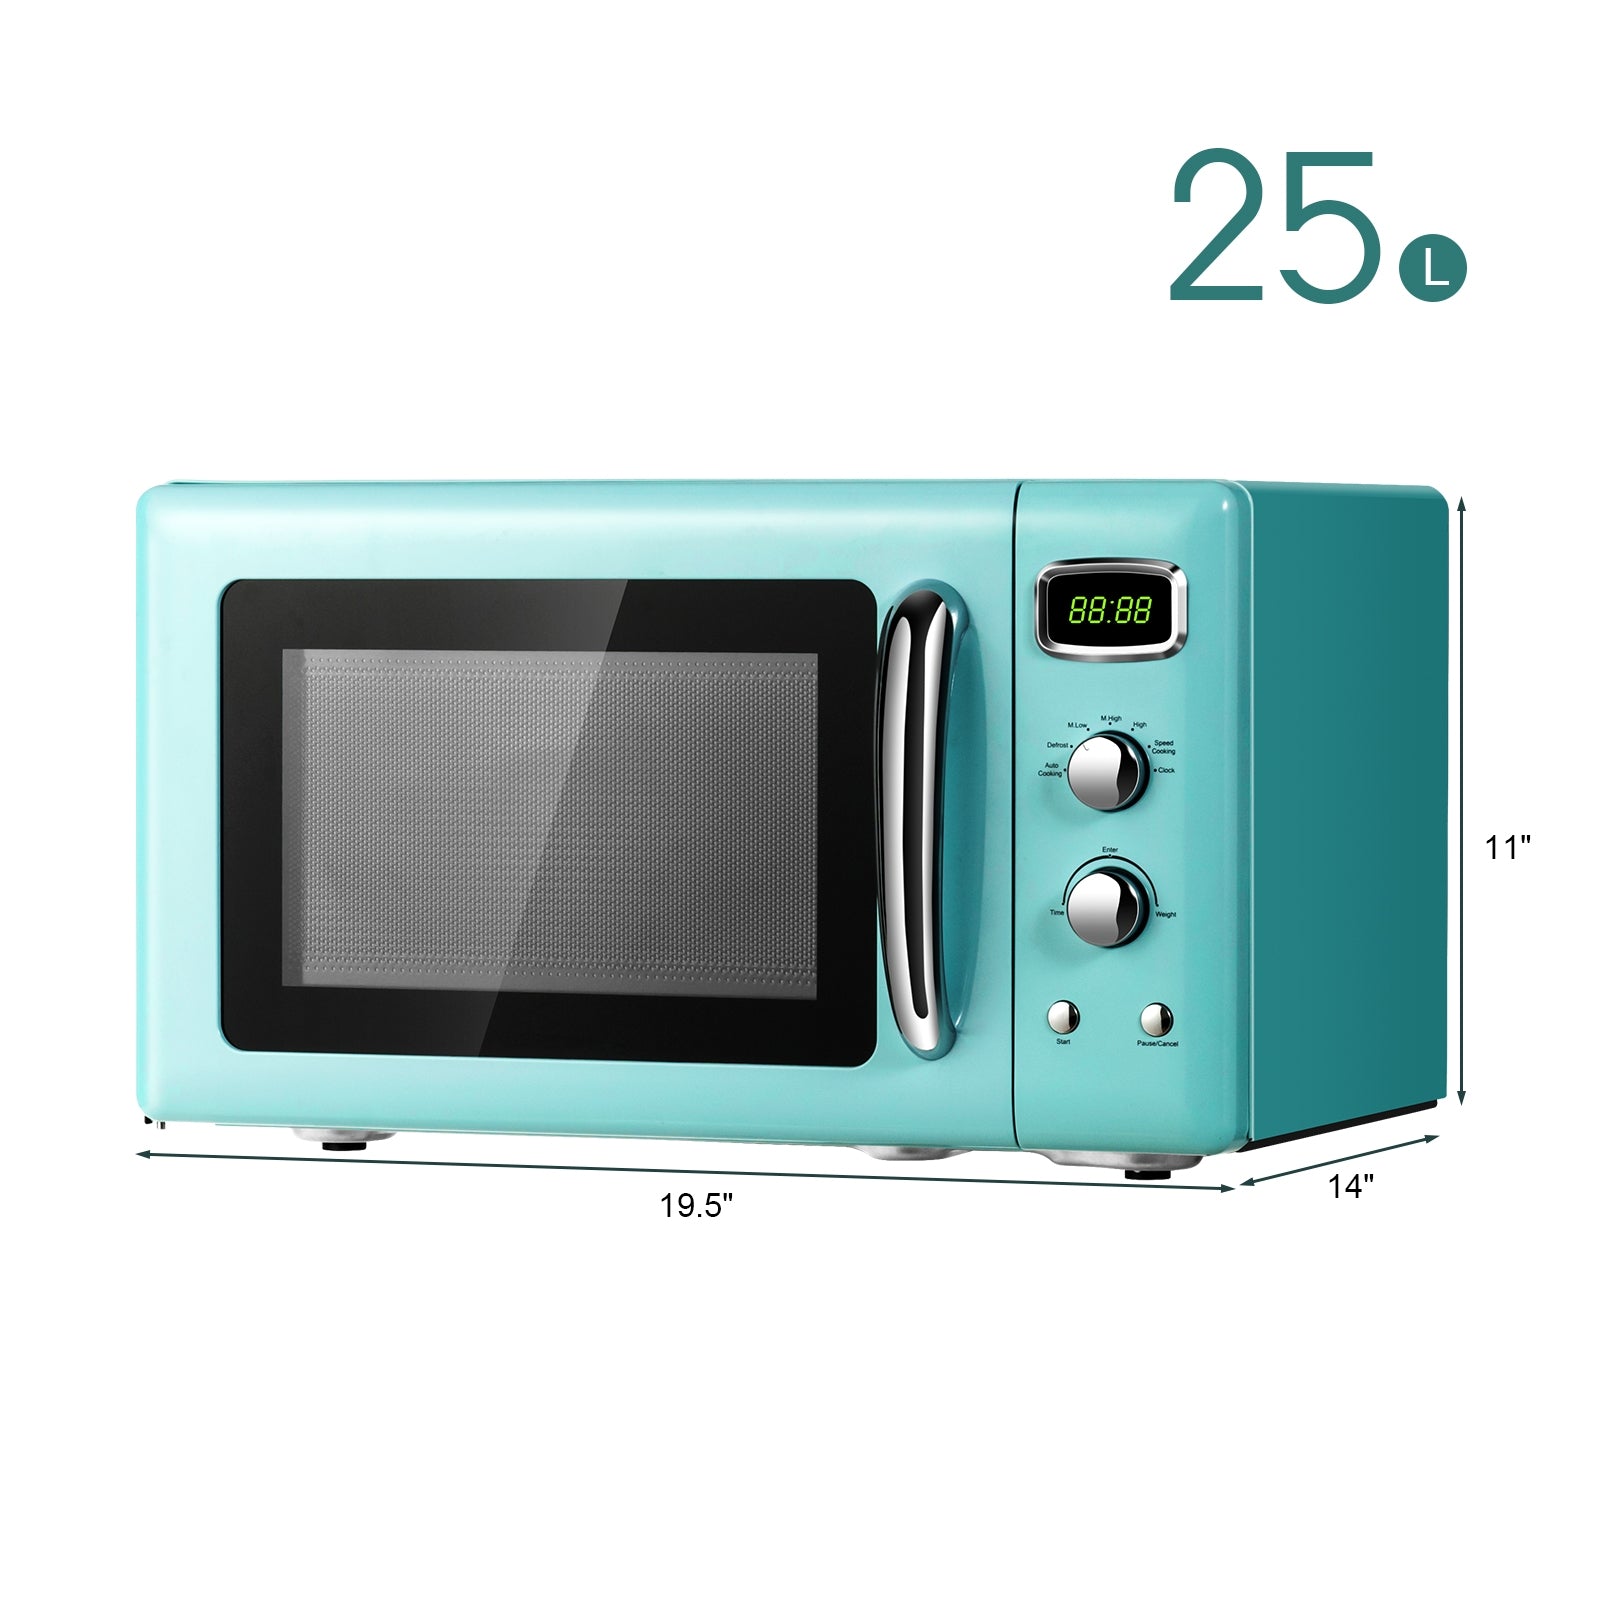 Technical details and thoughtful features: The microwave oven has an overall dimension of 19.5" x 14" x 11" (L x W x H), a turntable diameter of 10.5", and a capacity of 0.9 Cu.ft. It offers an output power of 900W and comes with a certified UL power cord. For added safety, it includes a child lock function that can be activated or canceled by holding the pause/cancel button for 3 seconds, preventing unsupervised use by children.